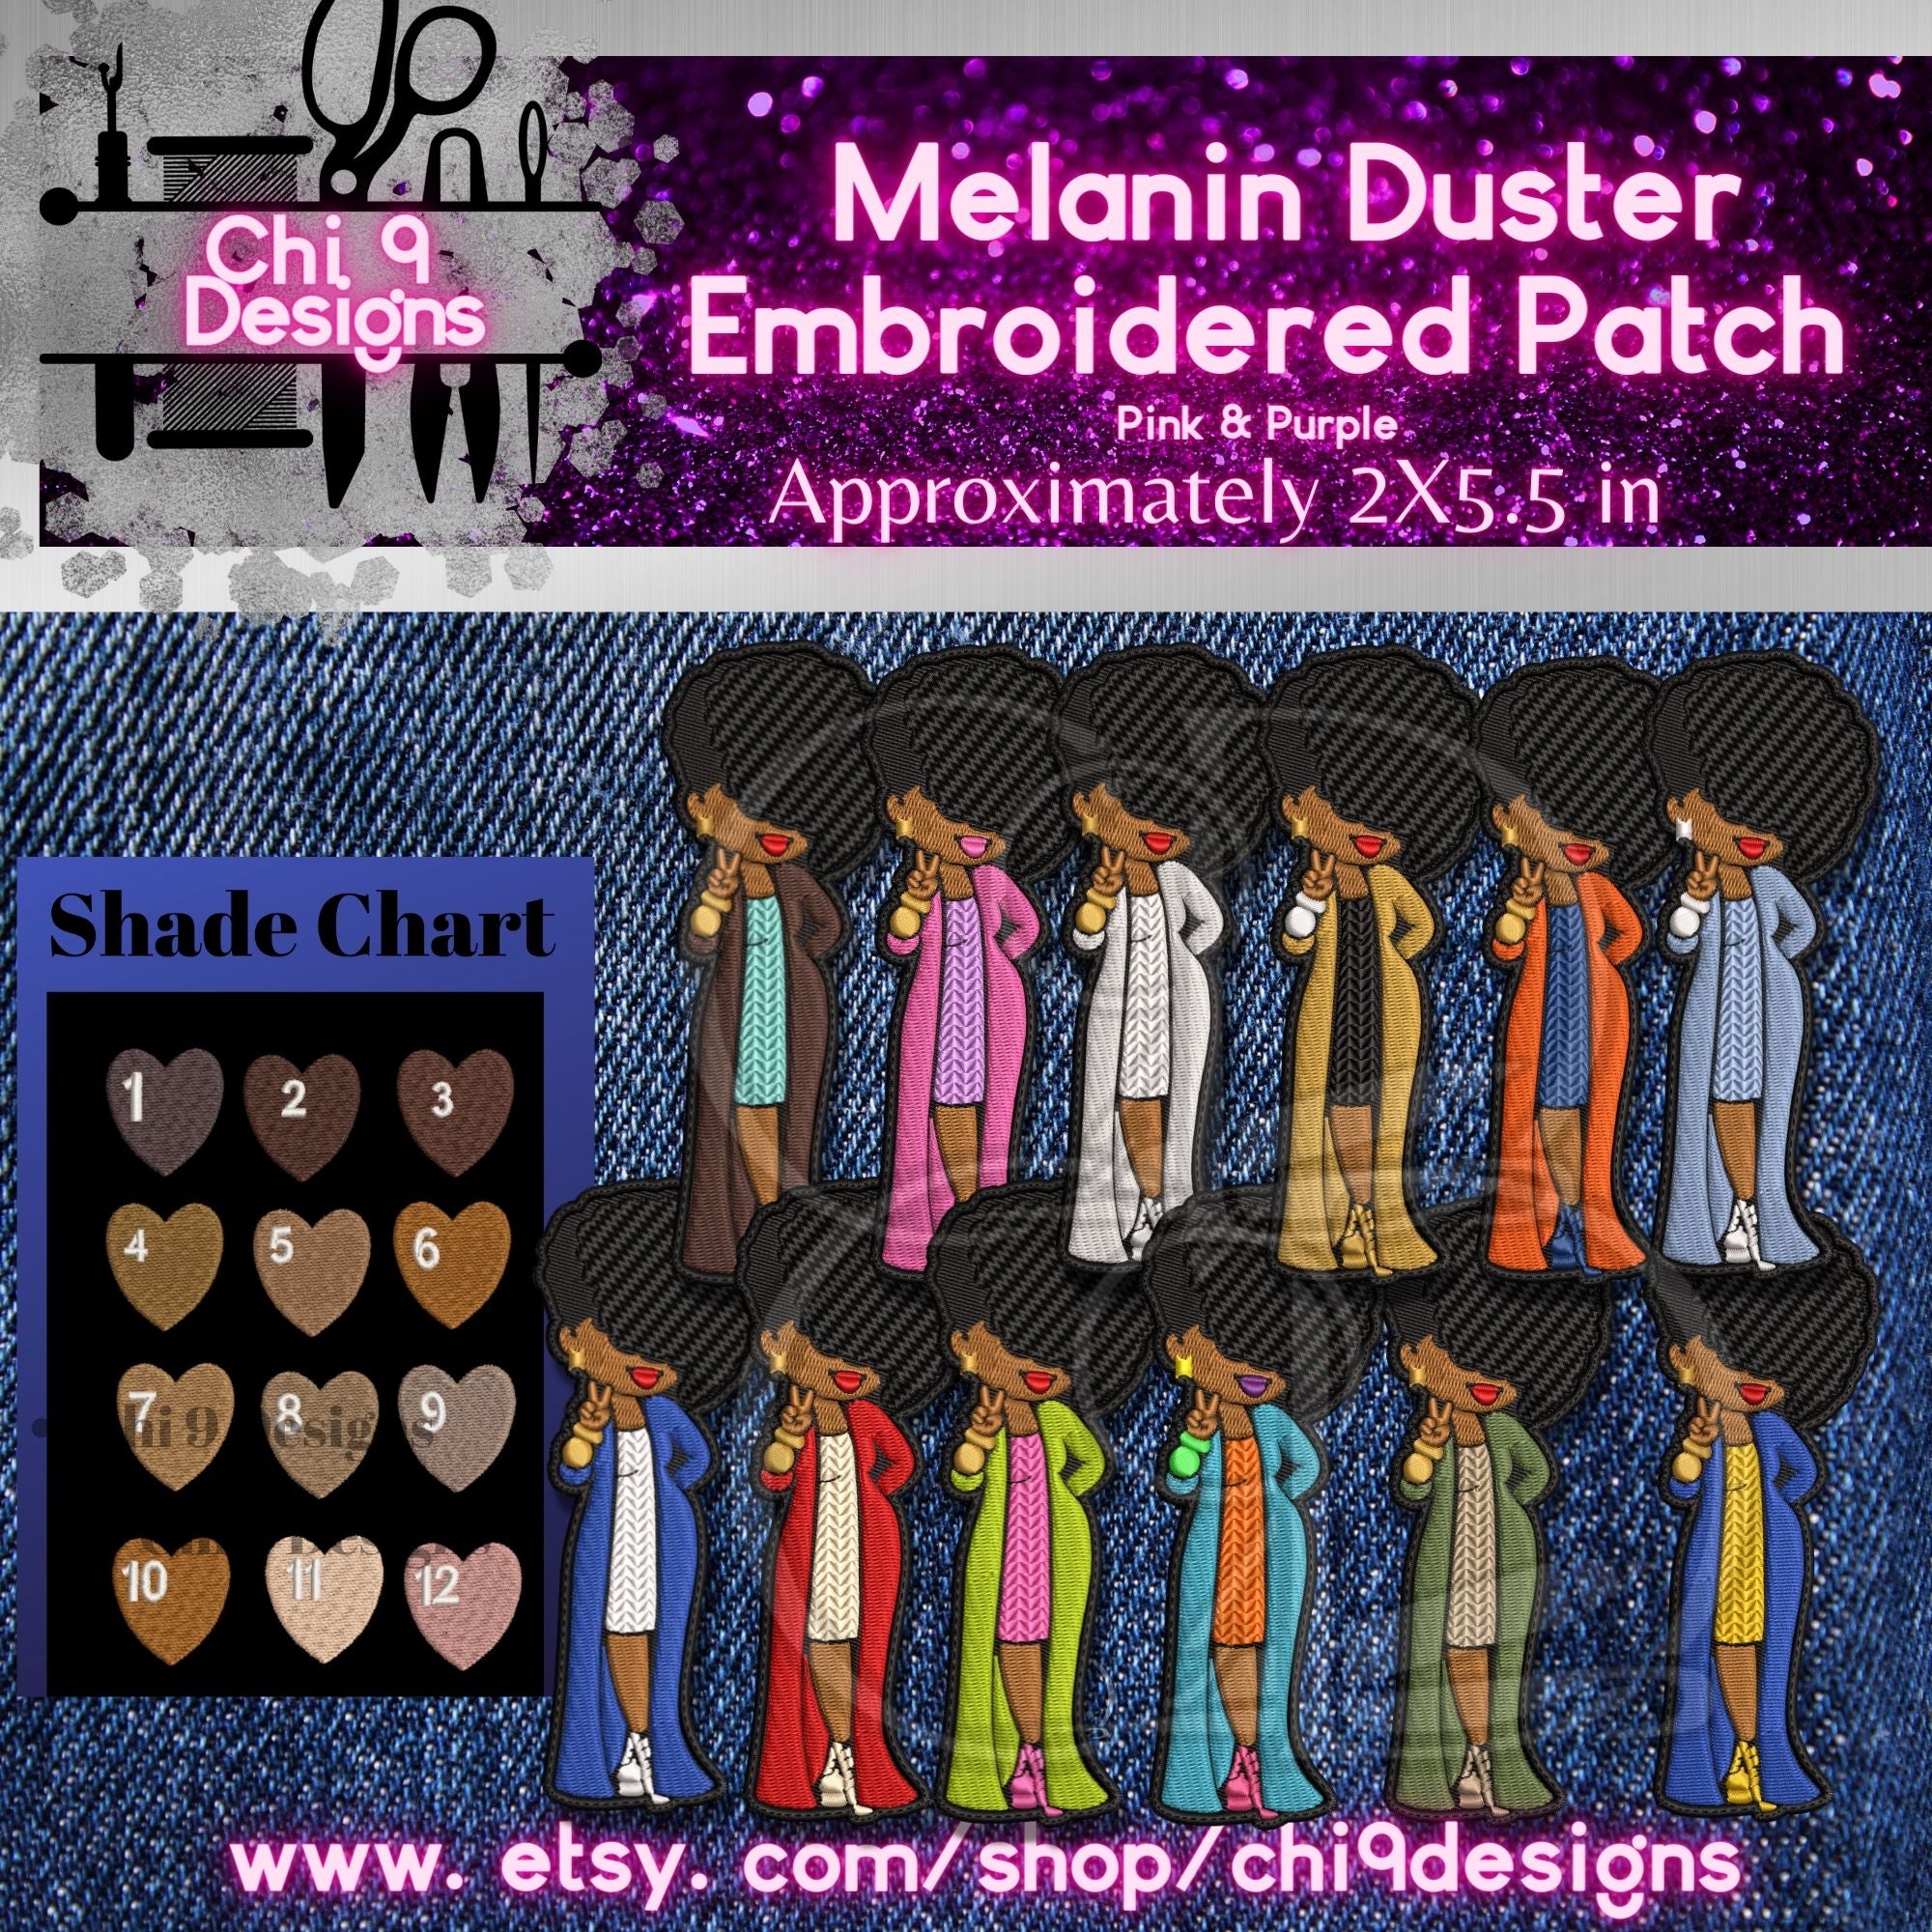 Melanin Duster Embroidered Patch with All White Clothes